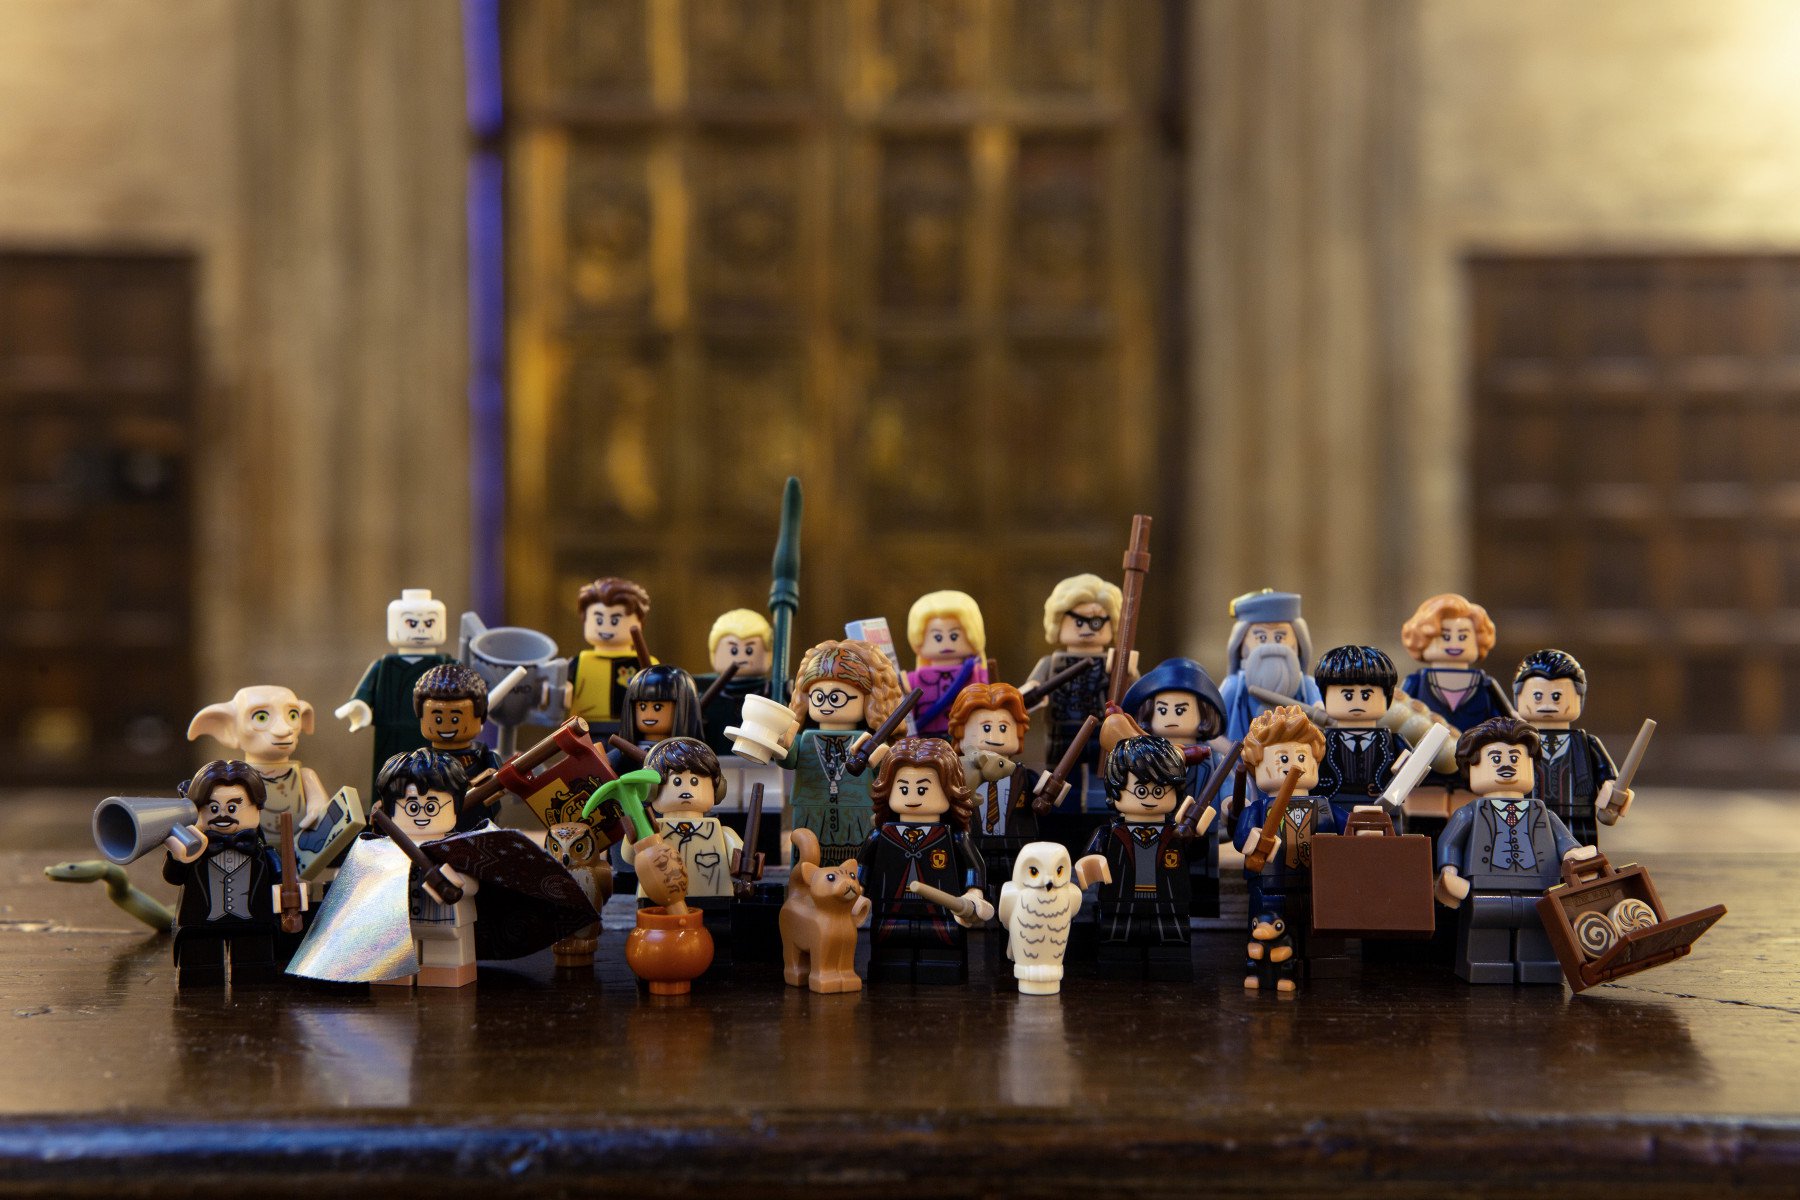 personnage lego harry potter